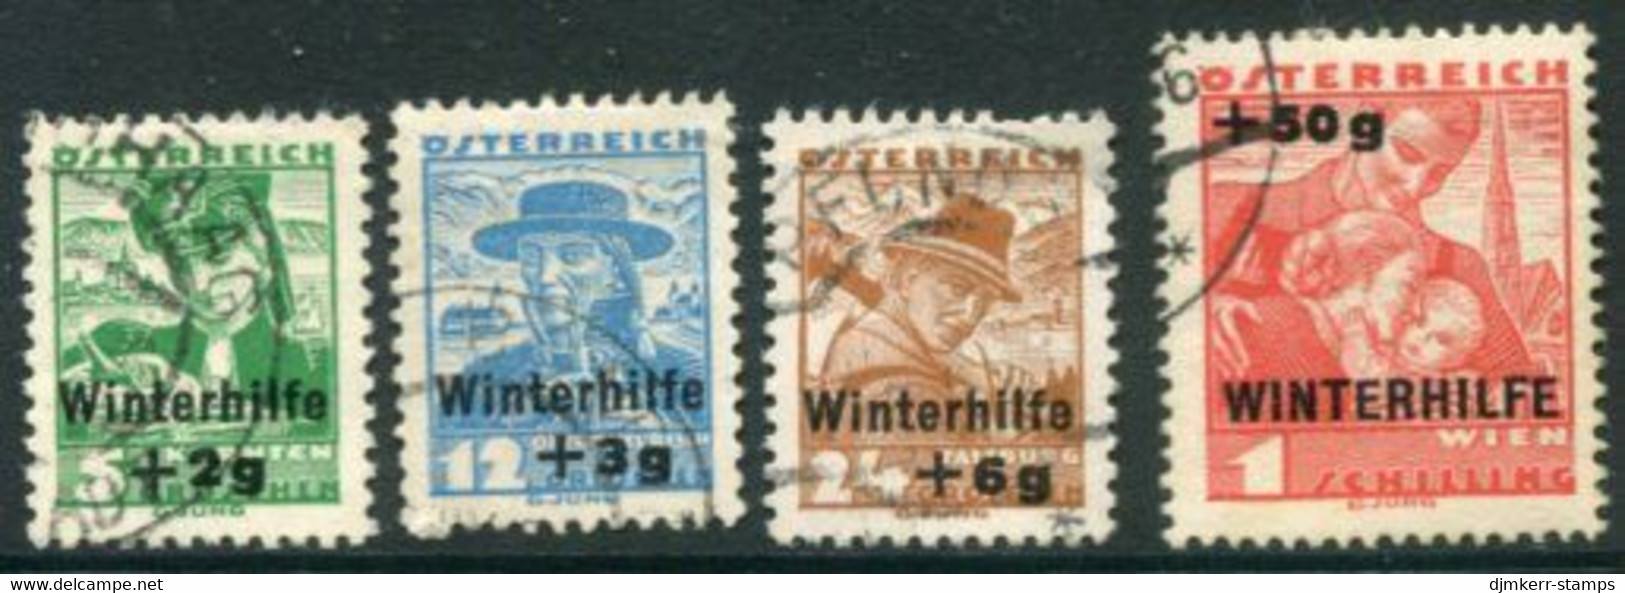 AUSTRIA 1935 Winter Relief Set Used.  Michel 613-16 - Used Stamps